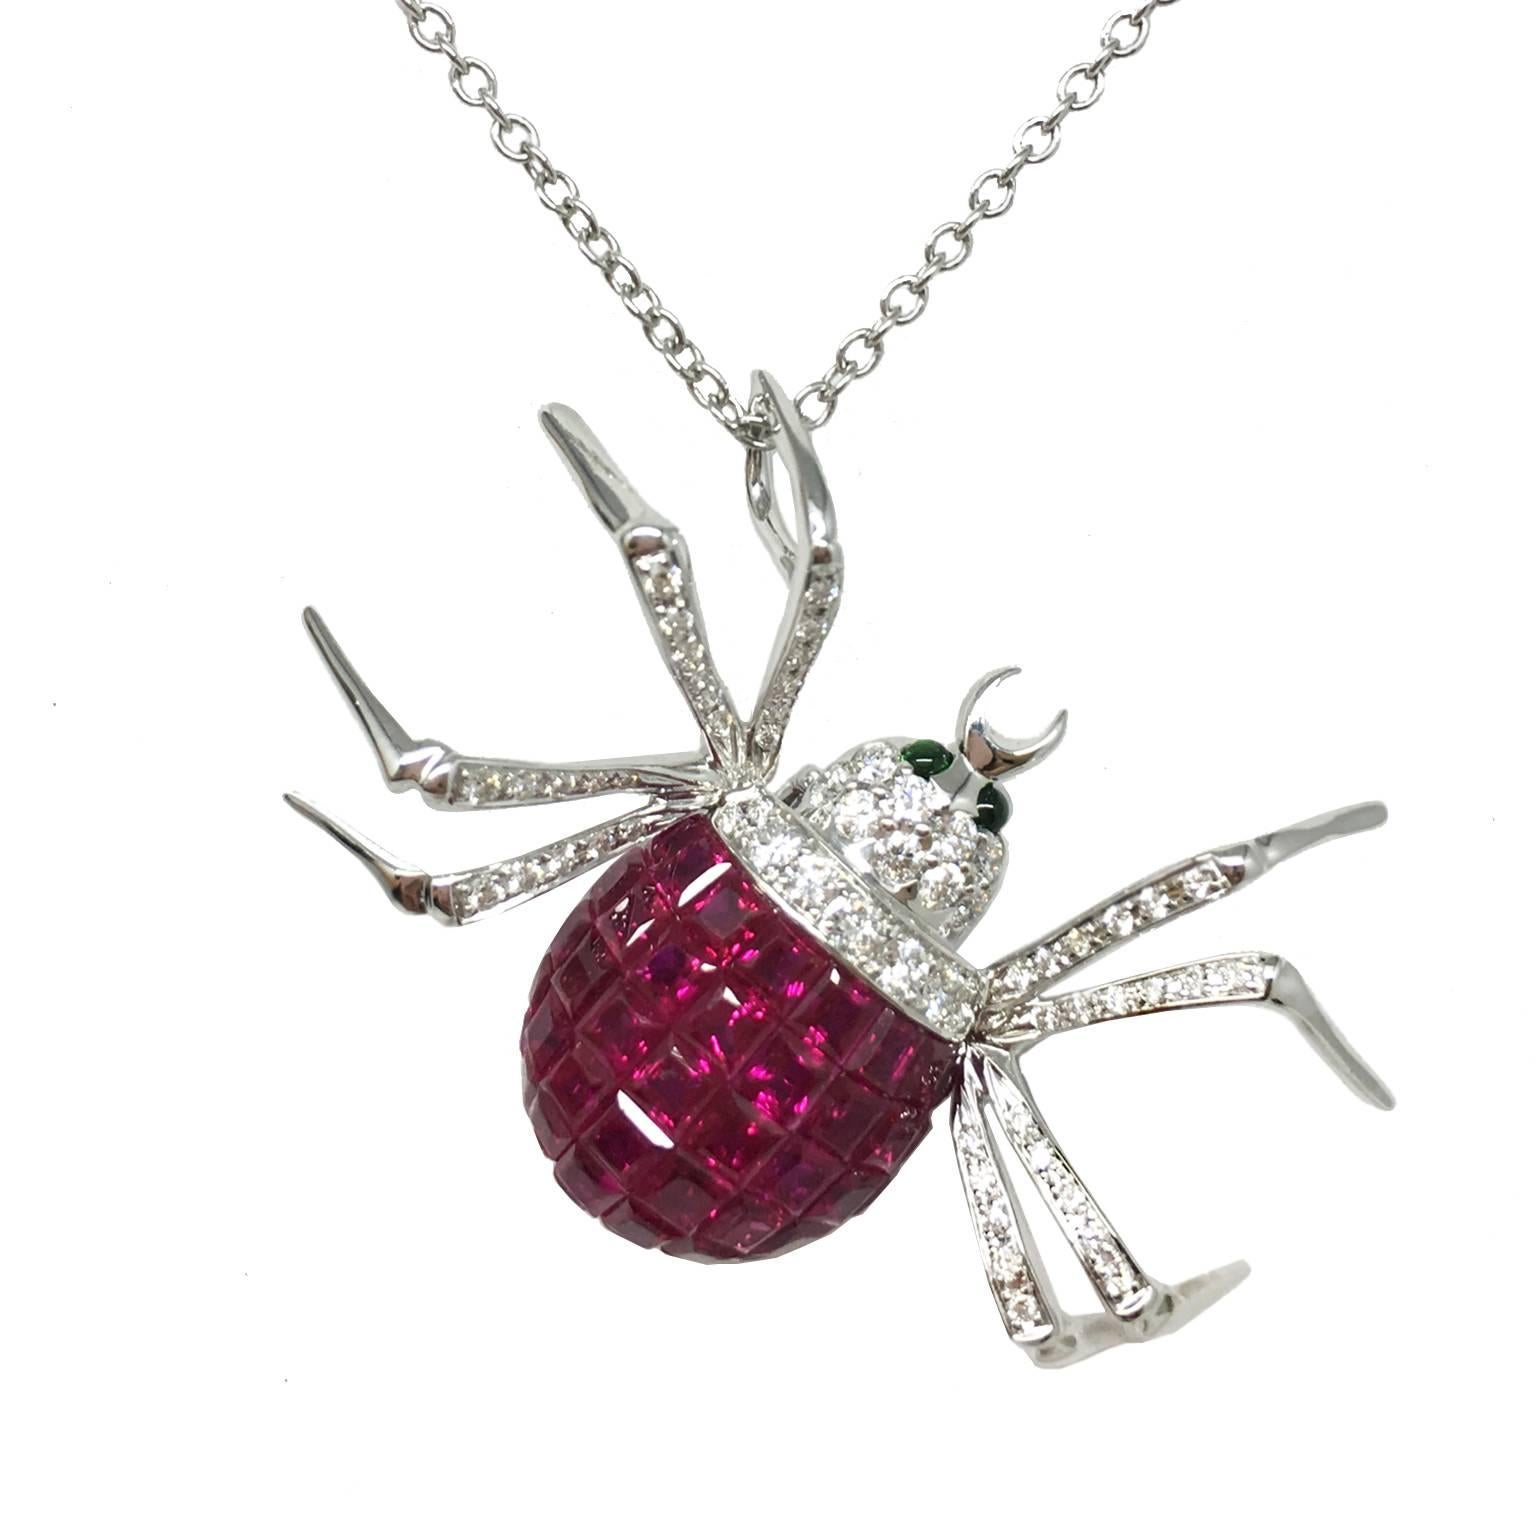 2-uses 18K White Gold Spider Brooch-Pendant set with 0.51 carat of Diamond, 7.83 carat of Ruby and 0.05 carat of Tsavorite.

18K chain not included.
